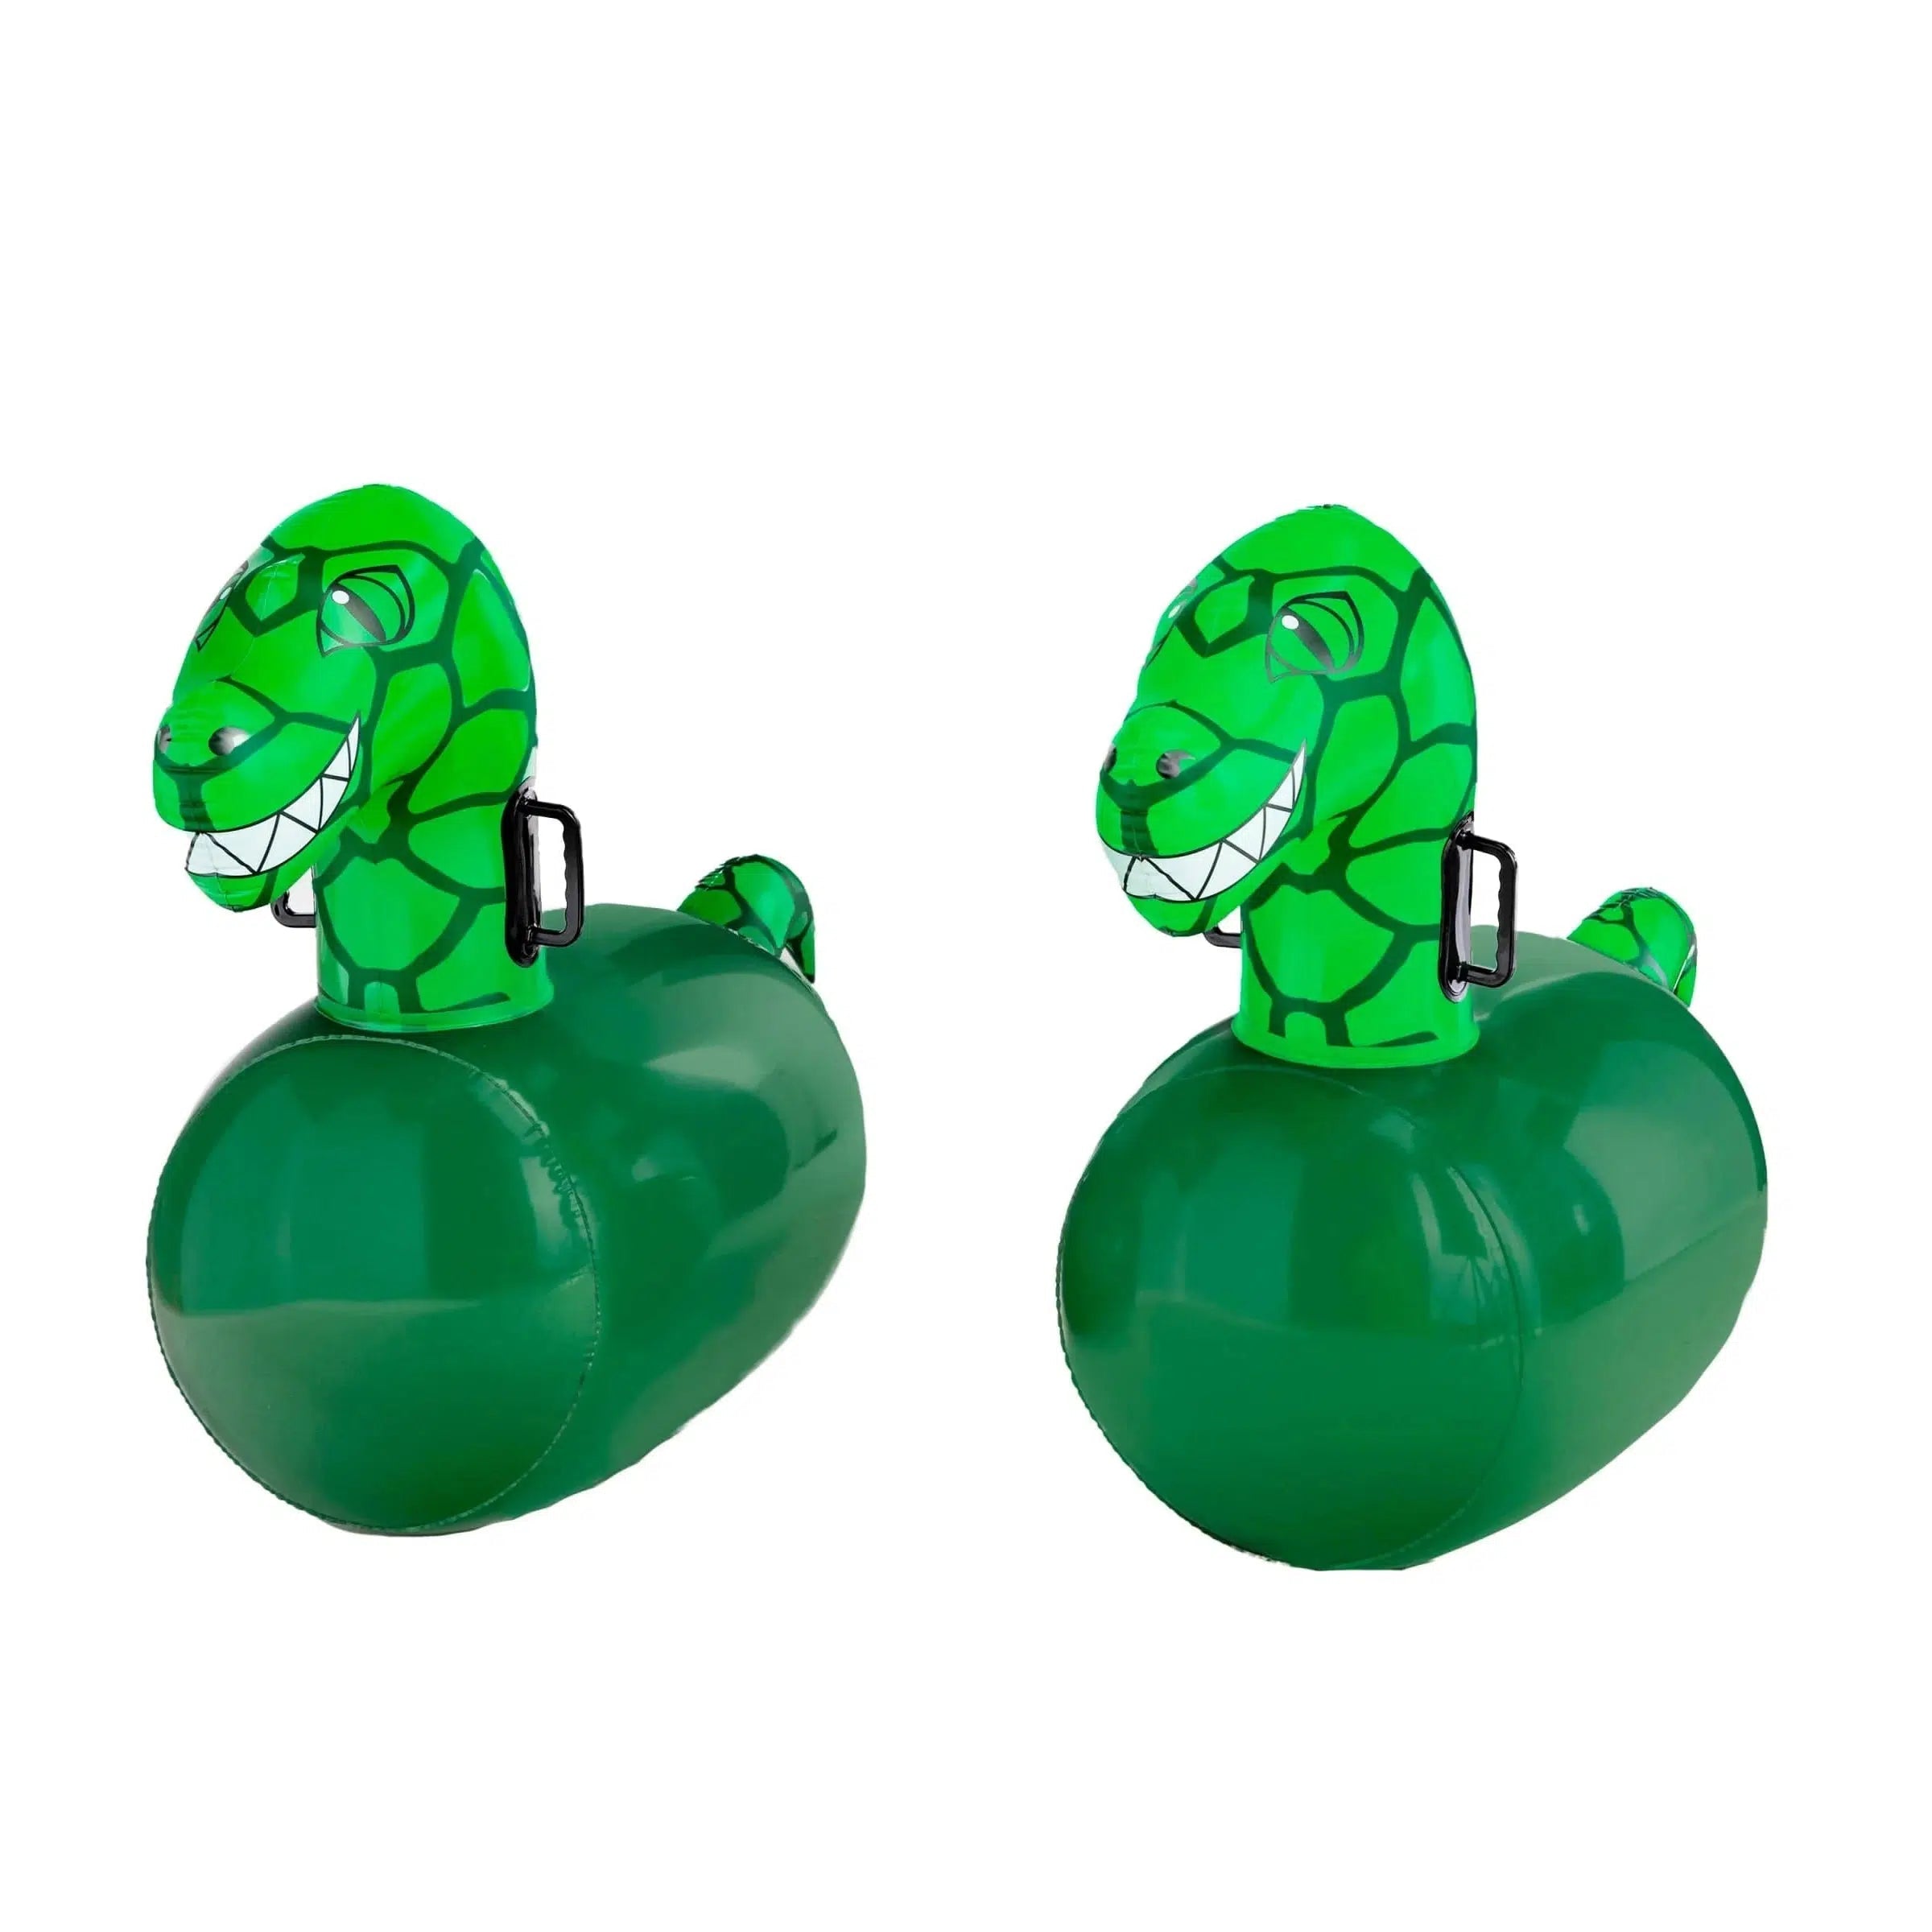 HearthSong-Inflatable Ride-On Hop ‘n Go Dinos Set of 2-CG733582-Legacy Toys